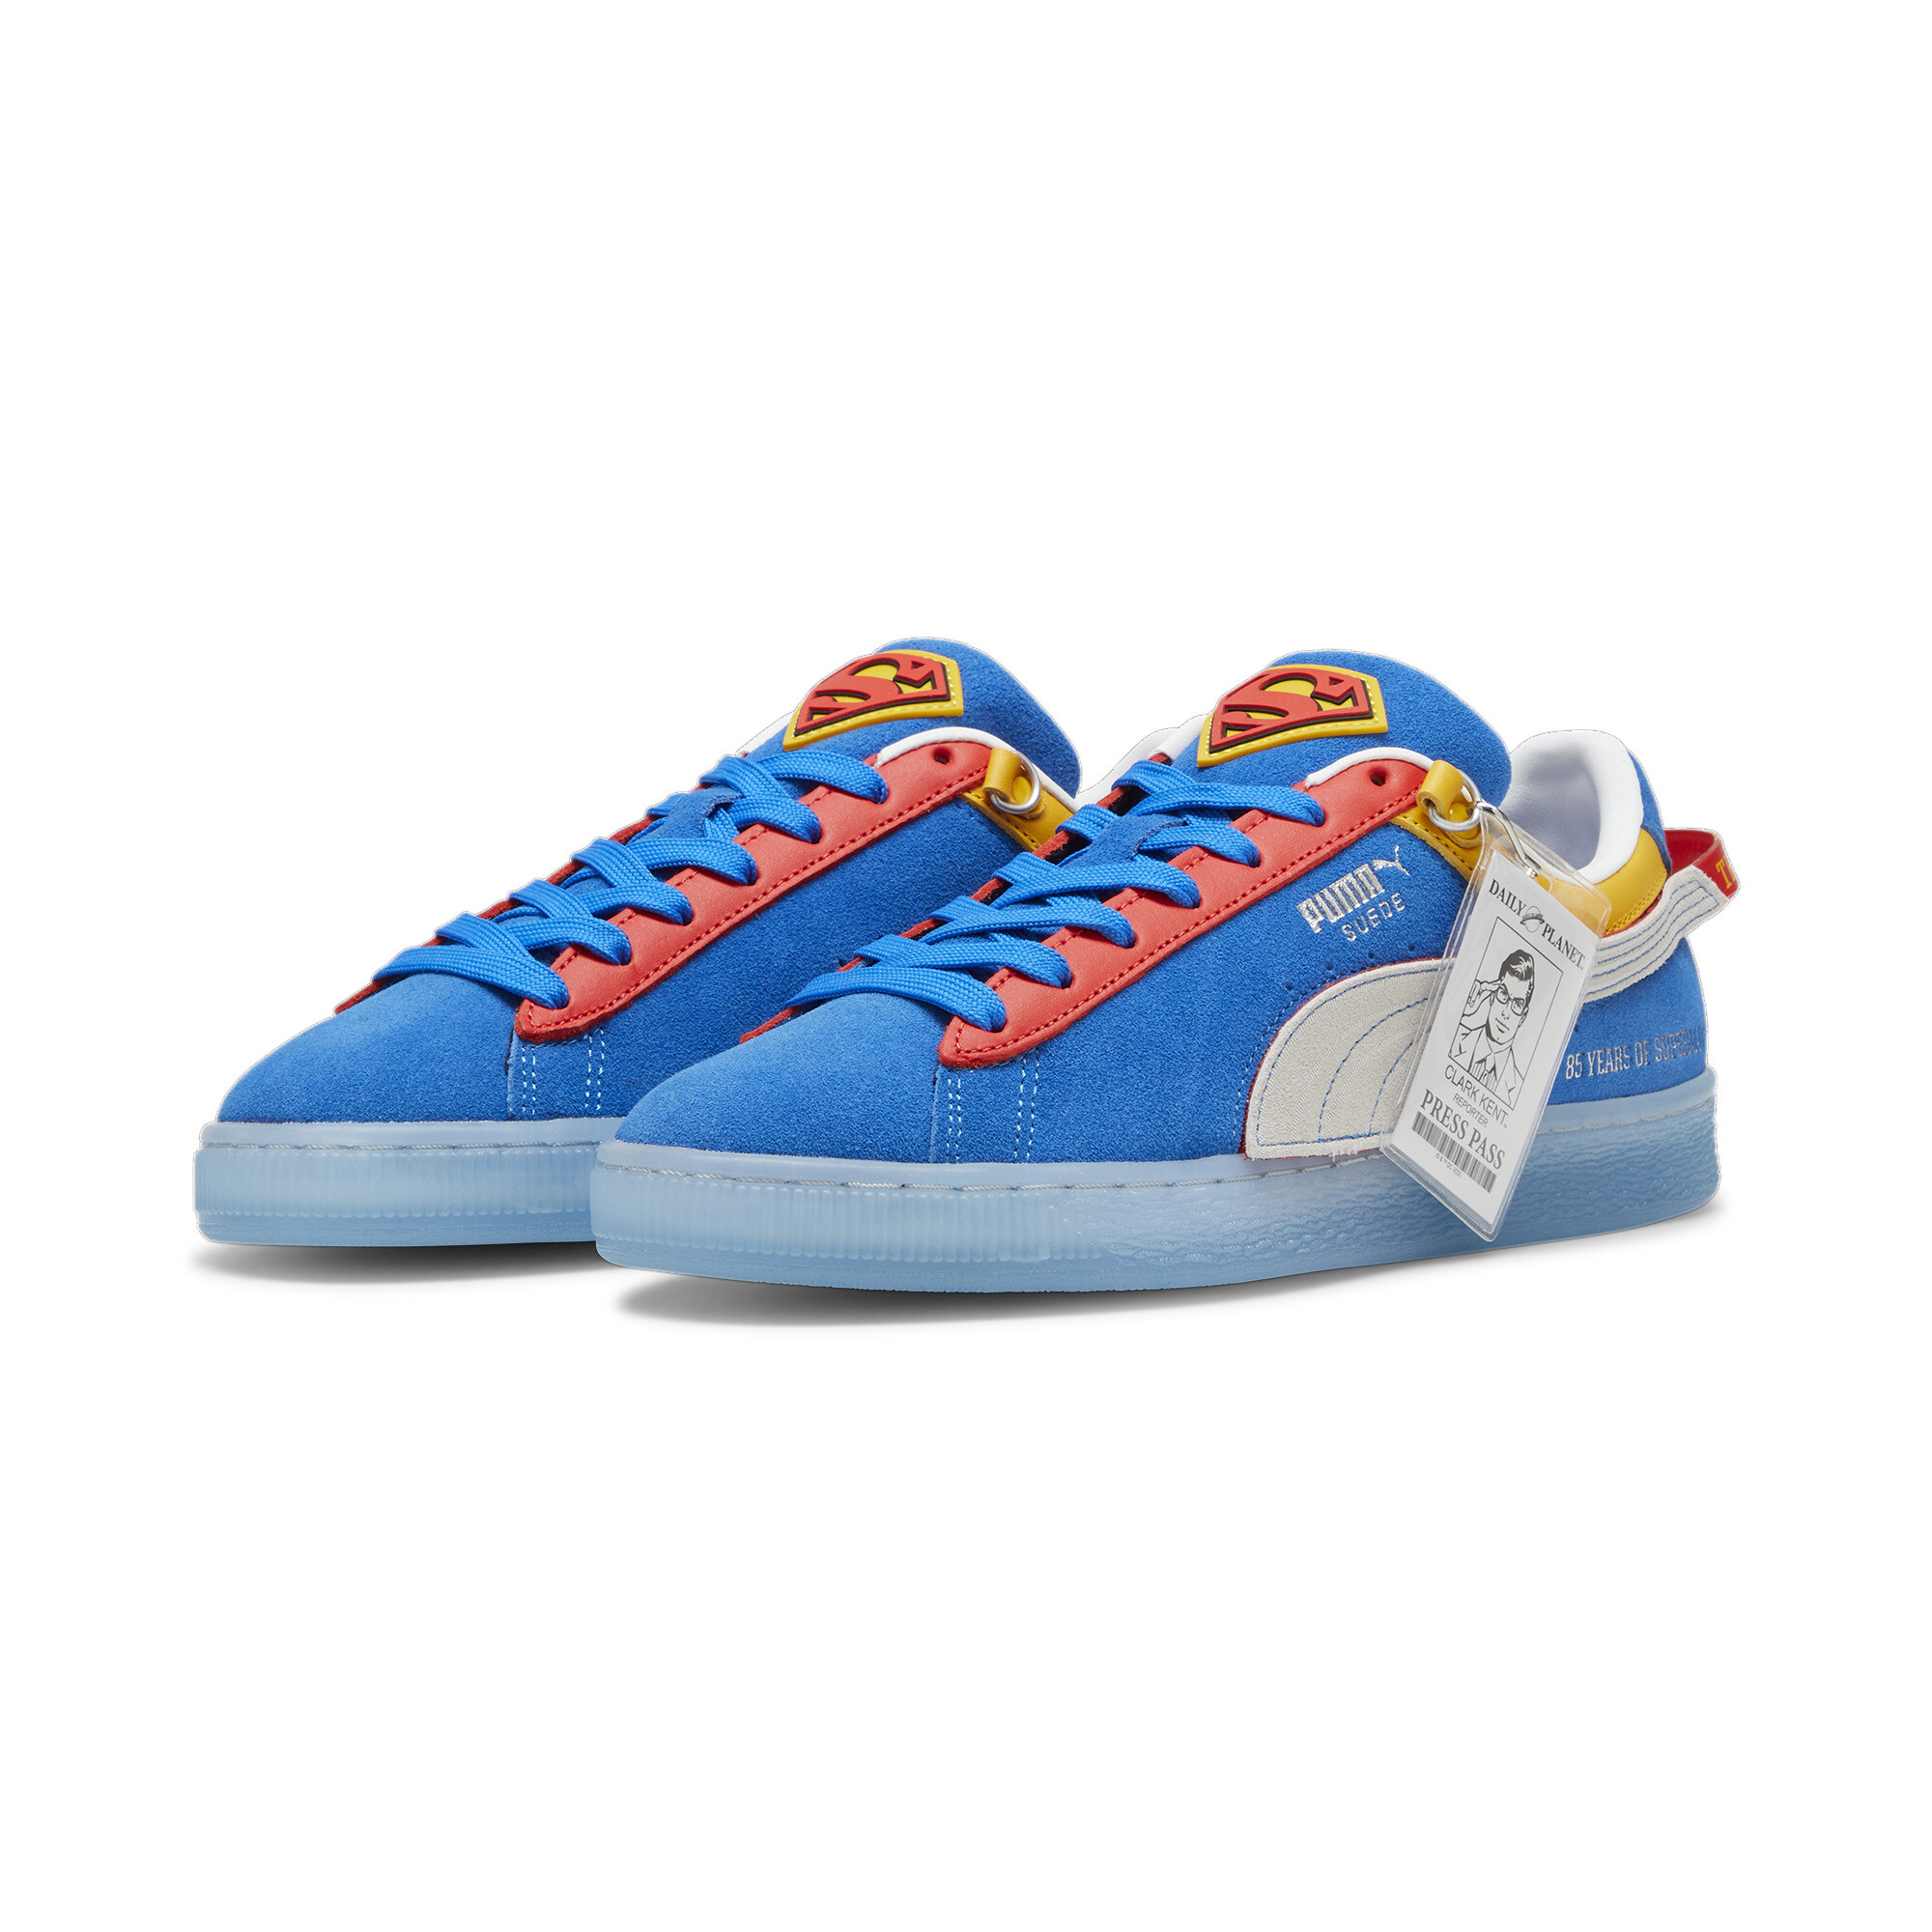 Puma X SUPERMAN 85th Anniversary Suede Sneakers, Blue, Size 42, Shoes